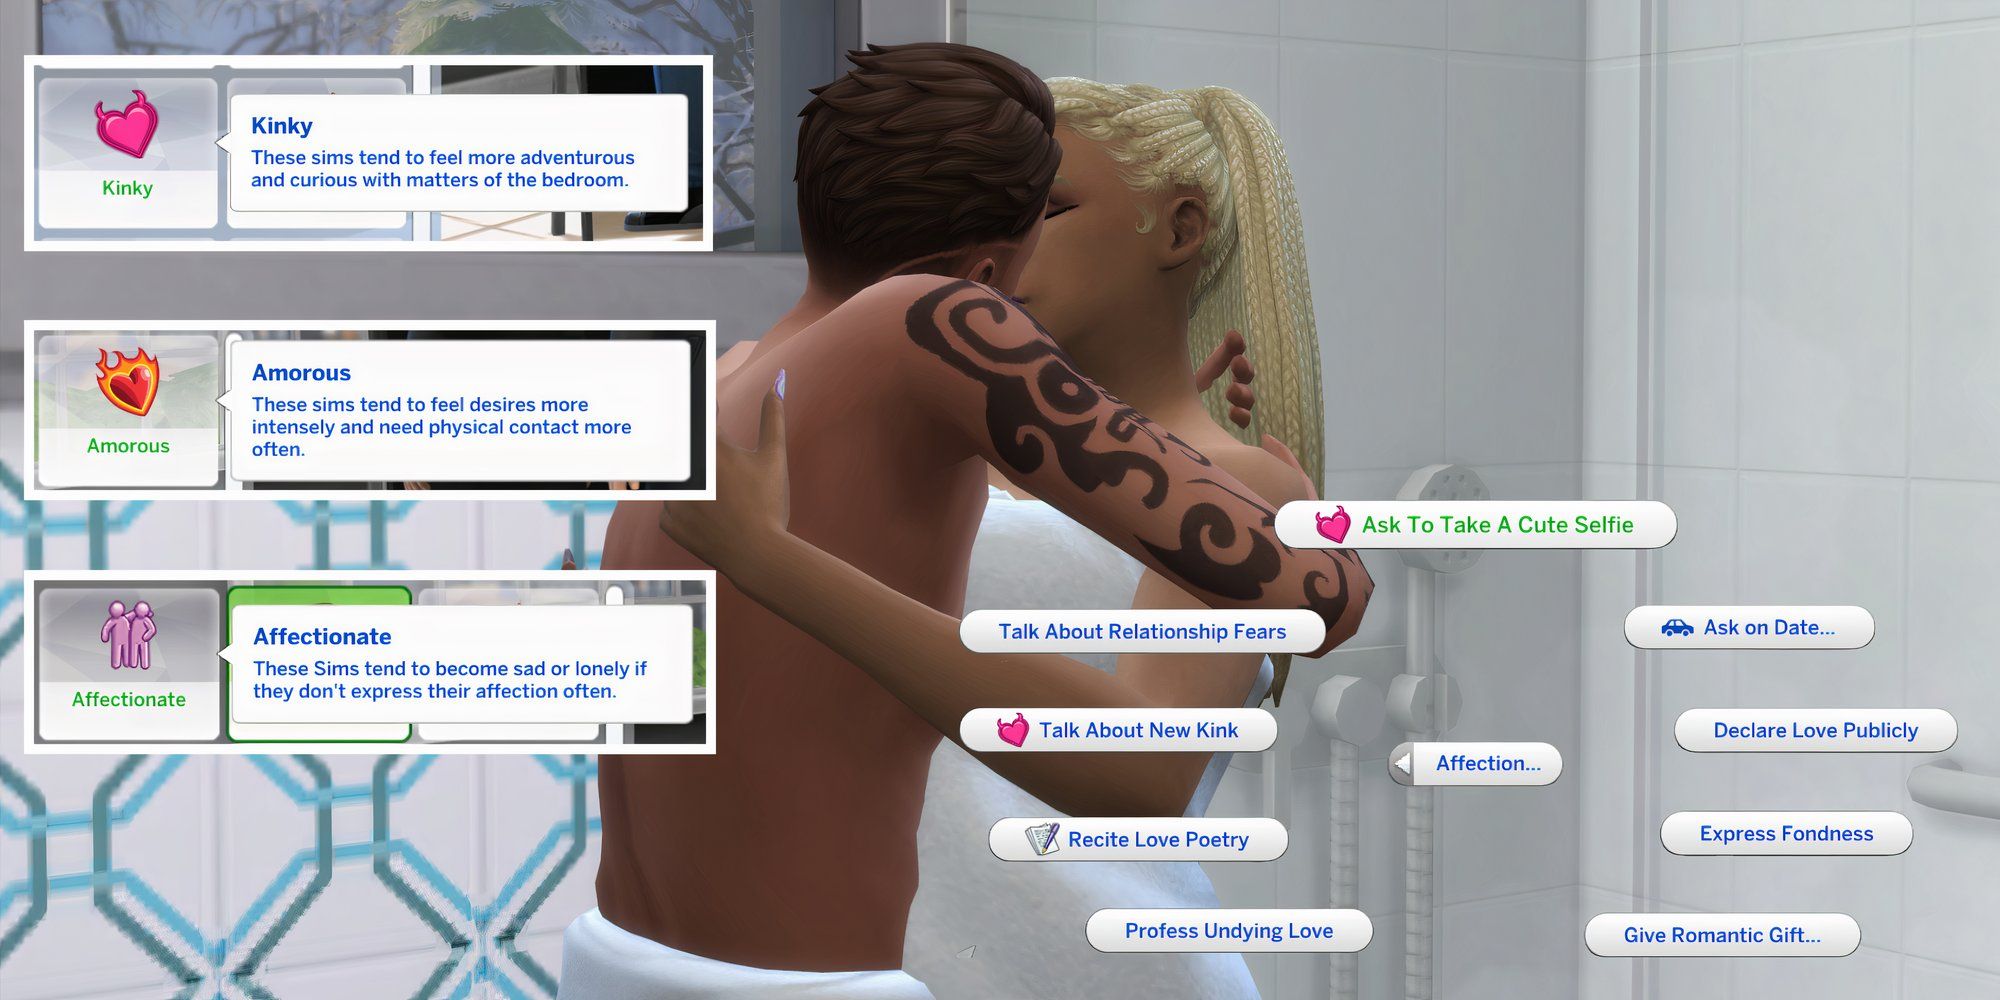 The Sultry Sims mod adds more adult themes to the game with three new traits and 12 new interactions